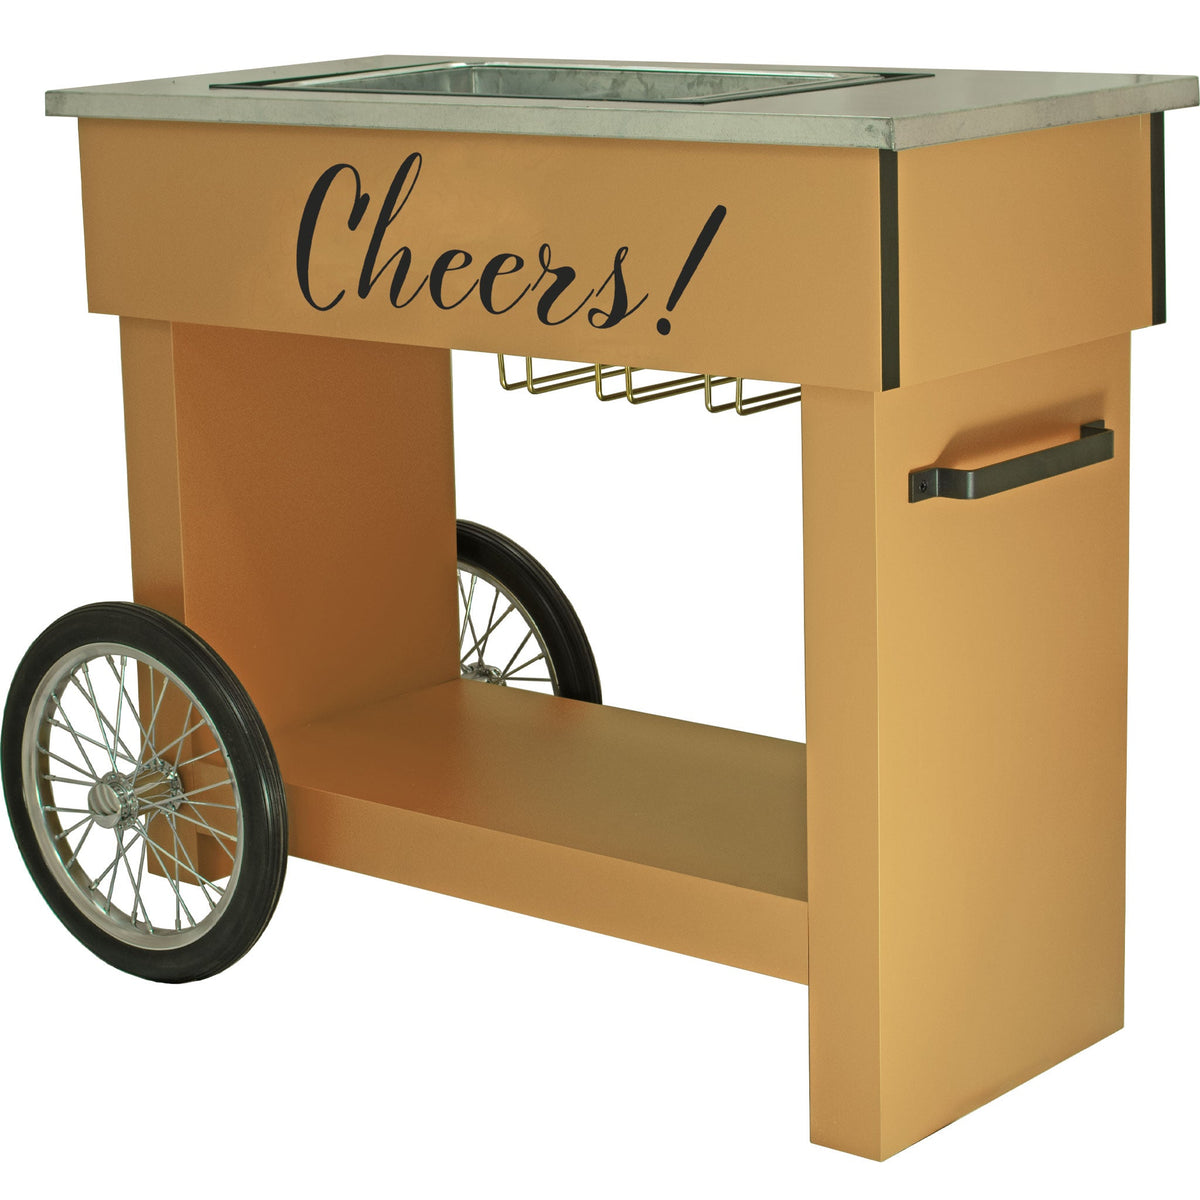 Lee Display's bar cart comes with black semi-pneumatic wheels and a handle to pull the cart and slide it around the floor.